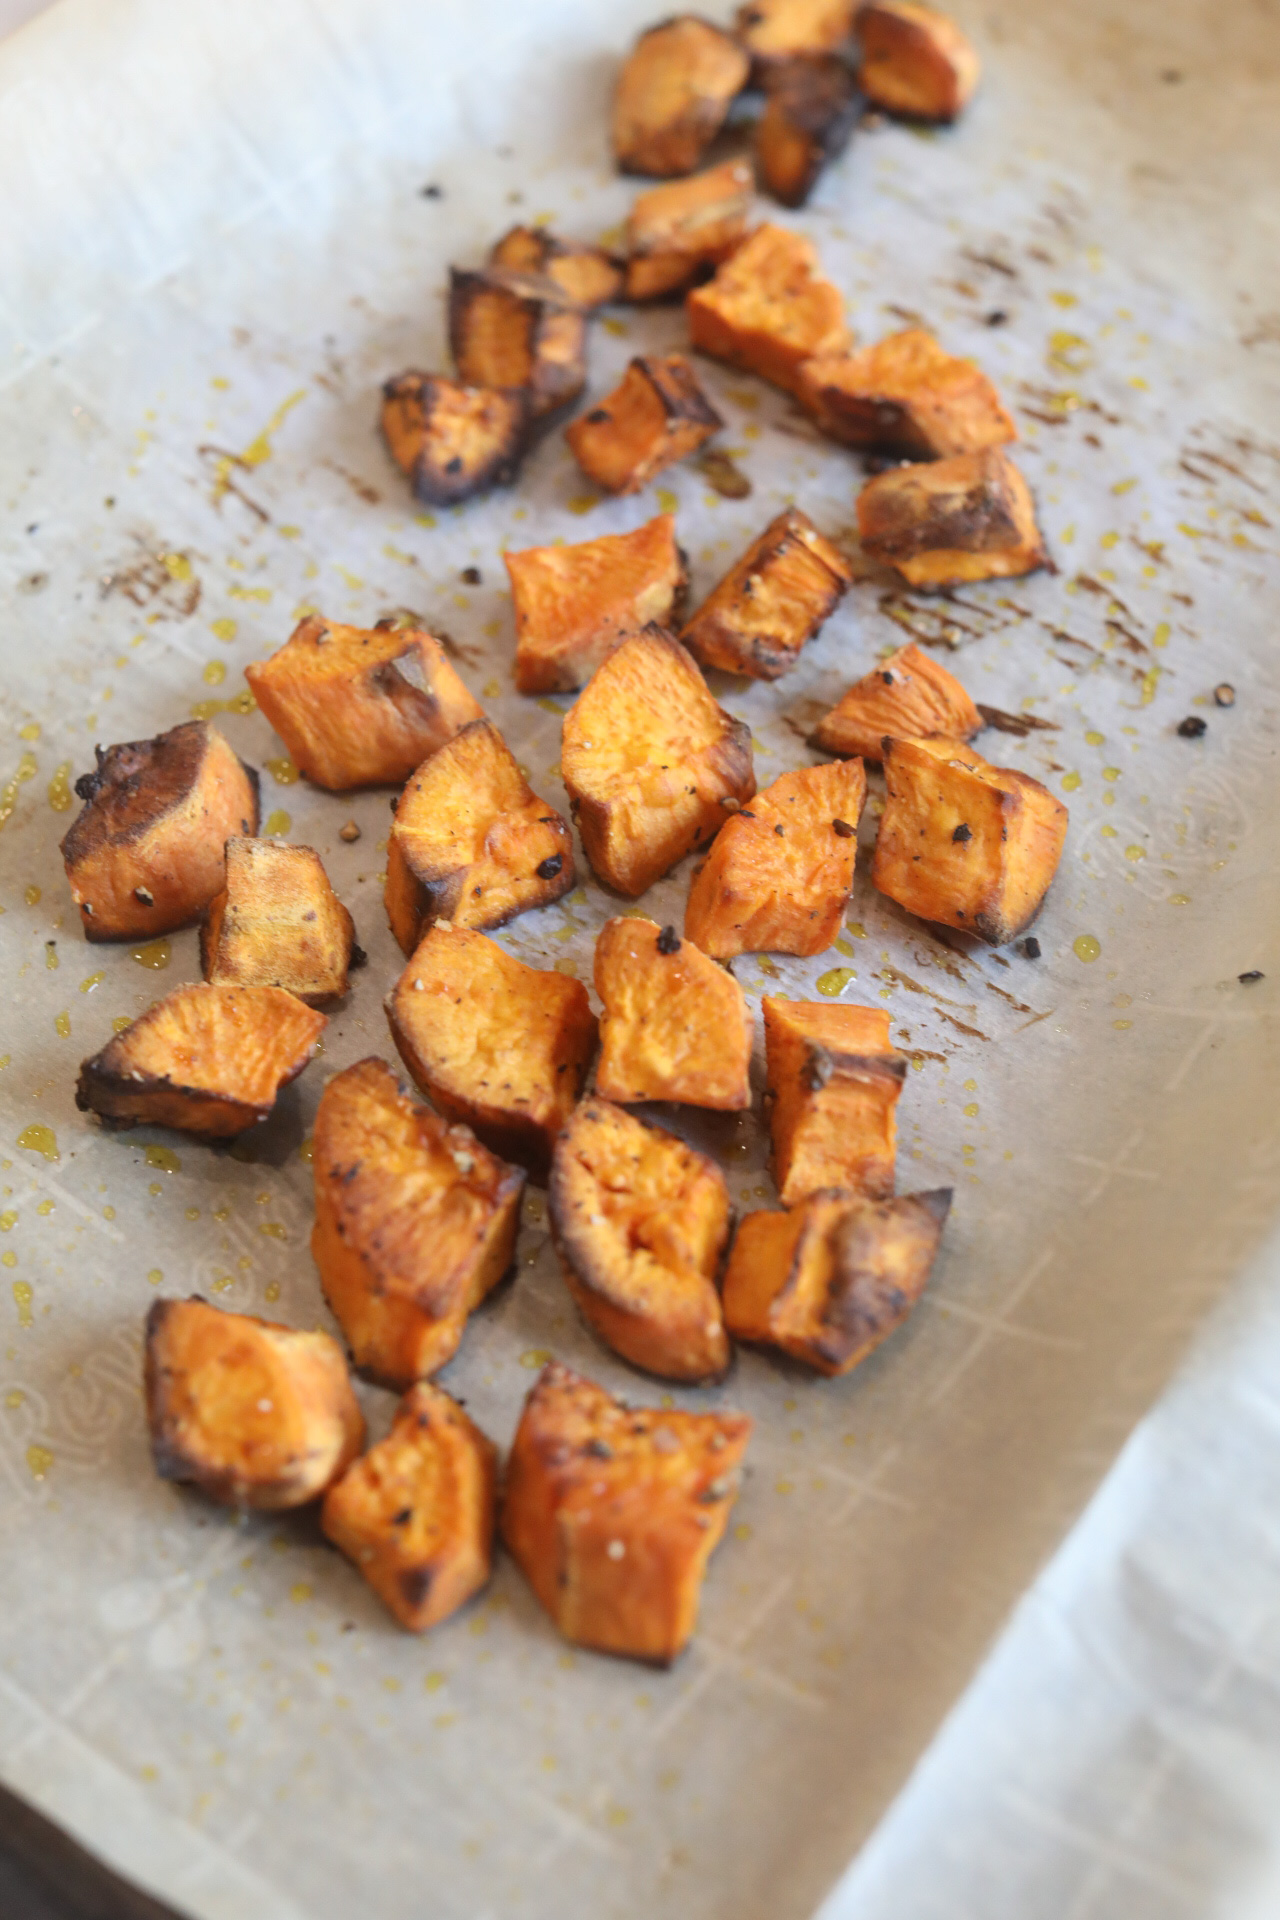 Roasted sweet potatoes roasted on parchment paper cut into chunks